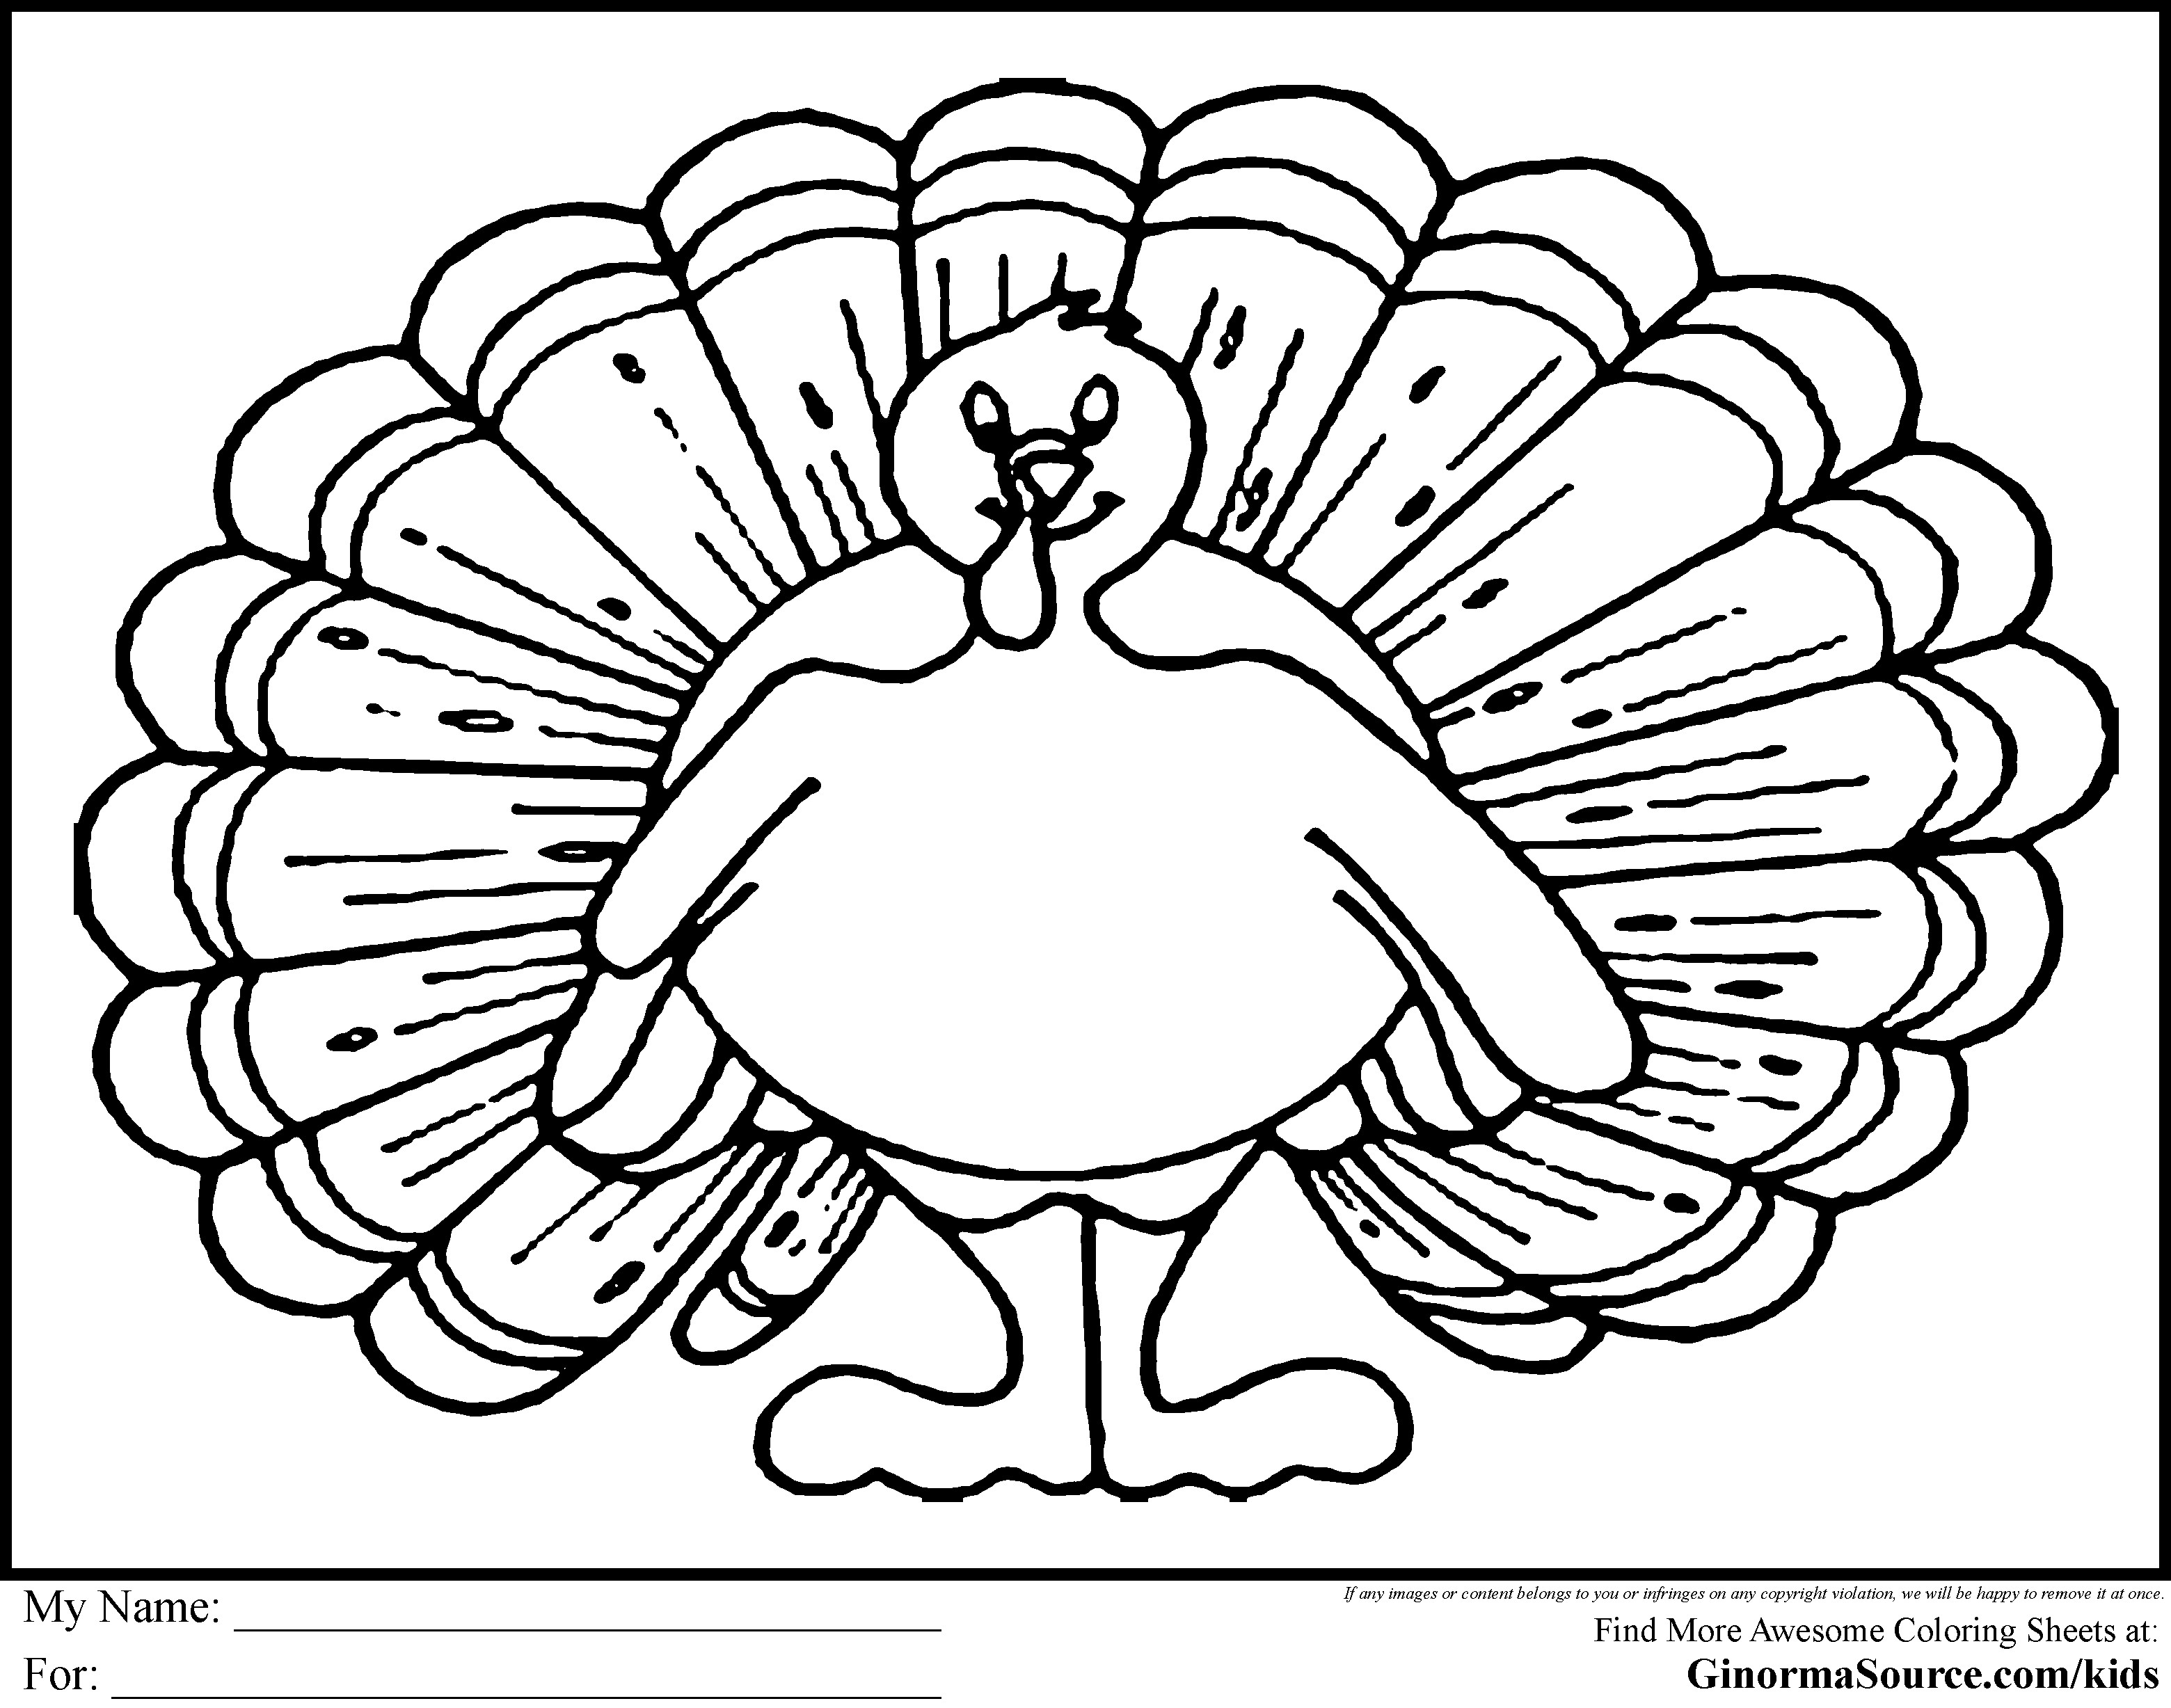 Thanksgiving Design Word Coloring Pages For Teens
 Thanksgiving Coloring Pages Dr Odd